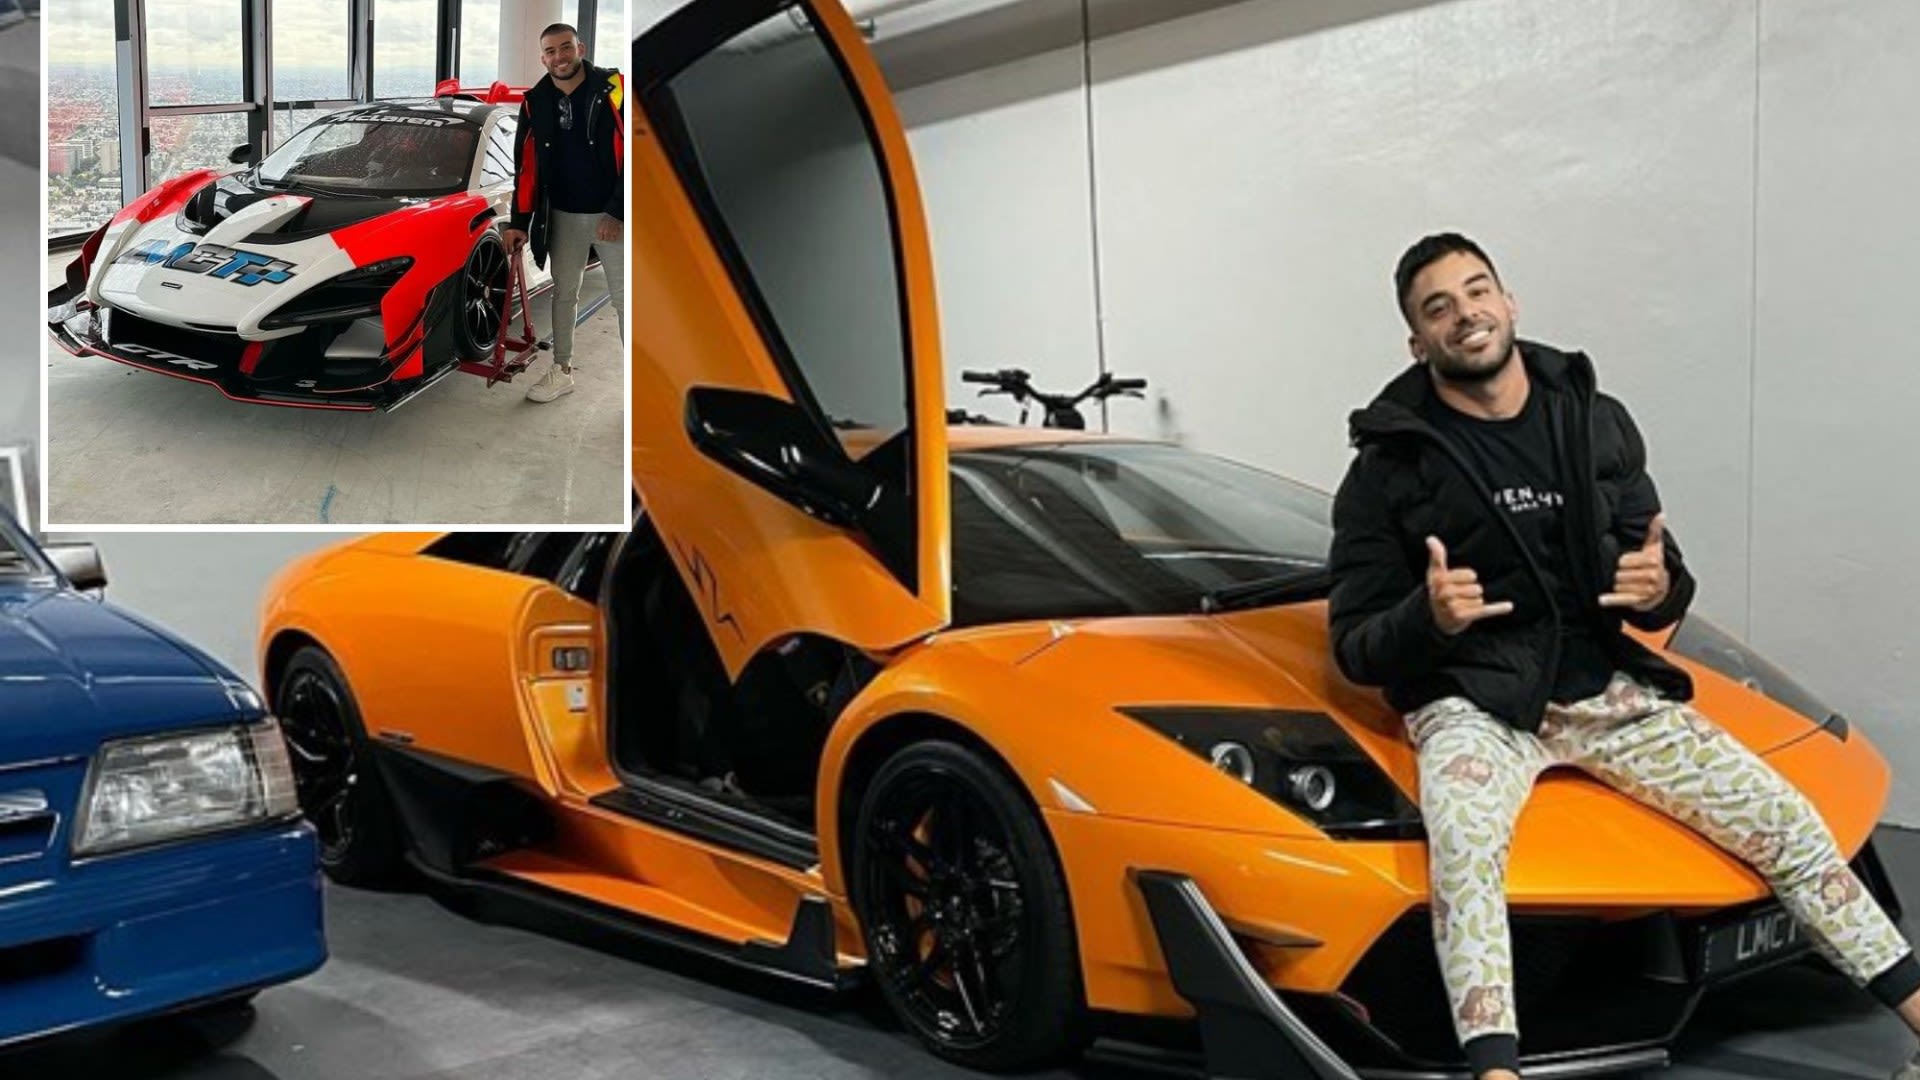 Inside billionaire's car collection from £1m McLaren hypercar to dune buggy